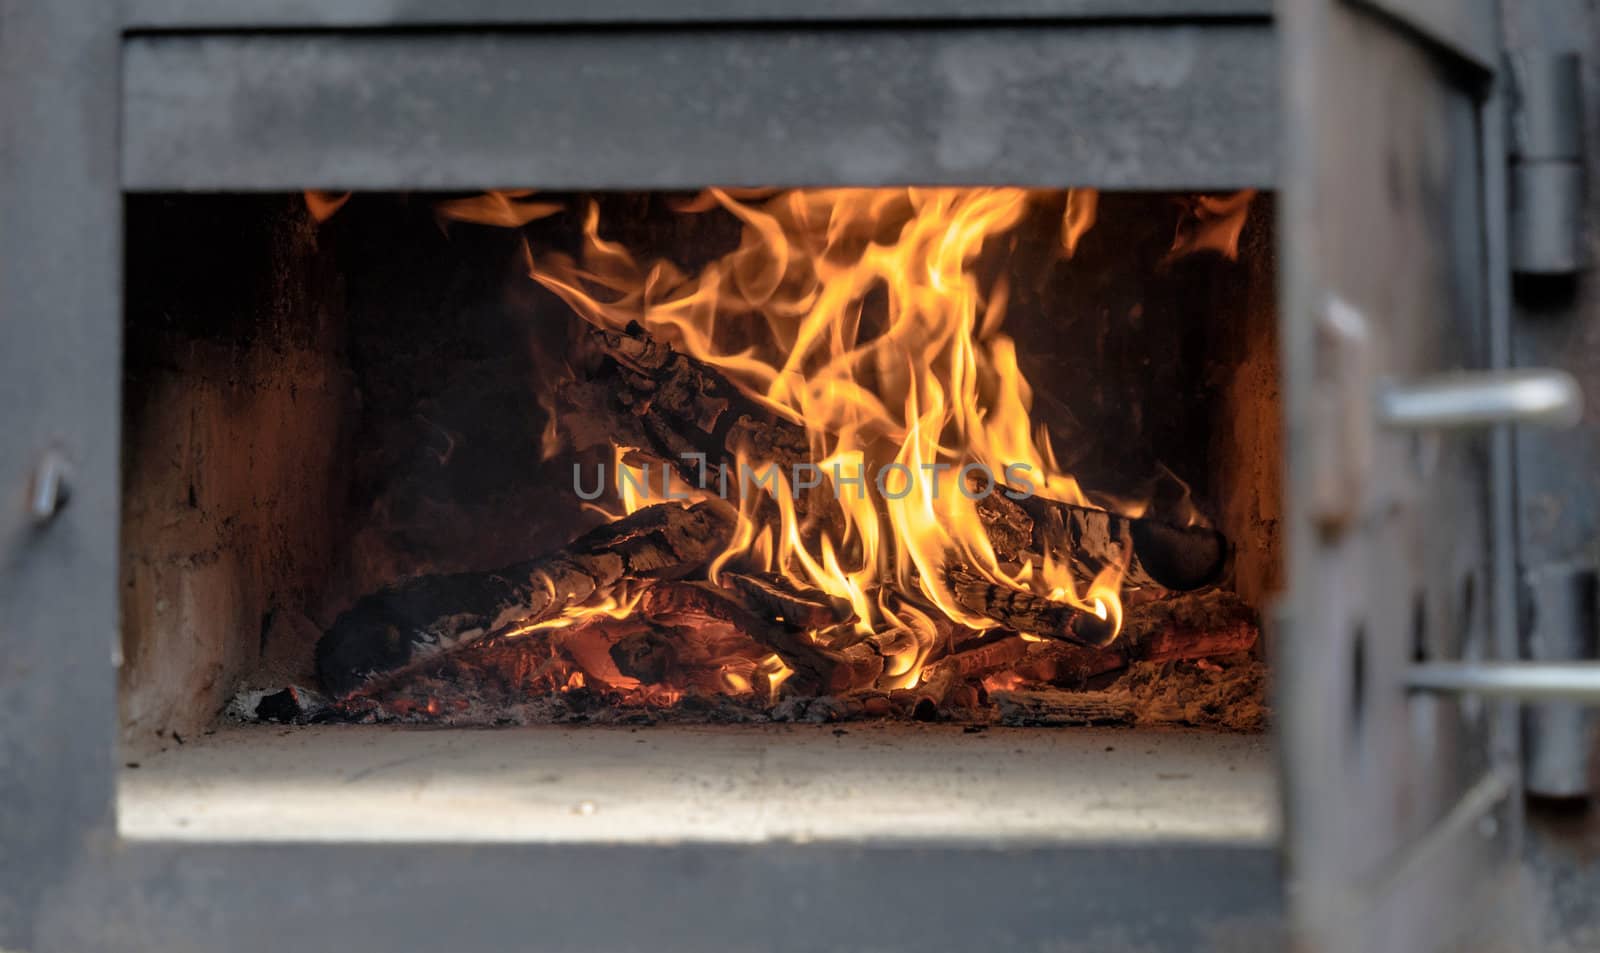 open, fire, fireplace, heat, heating, burn, place, high, yellow, flame, flames, log, wood, buschwood, element, natural, snug, orange, smoke, holiday, spark, glow, winter, background, wallpaper, detail, campfire, abstract, interior, hot, home, black, romantic, firewood, furnace, red, oven, stove, light, bright, fuel, warm, closeup, energy, combustible, design, ash, blazing, fireside by geogif